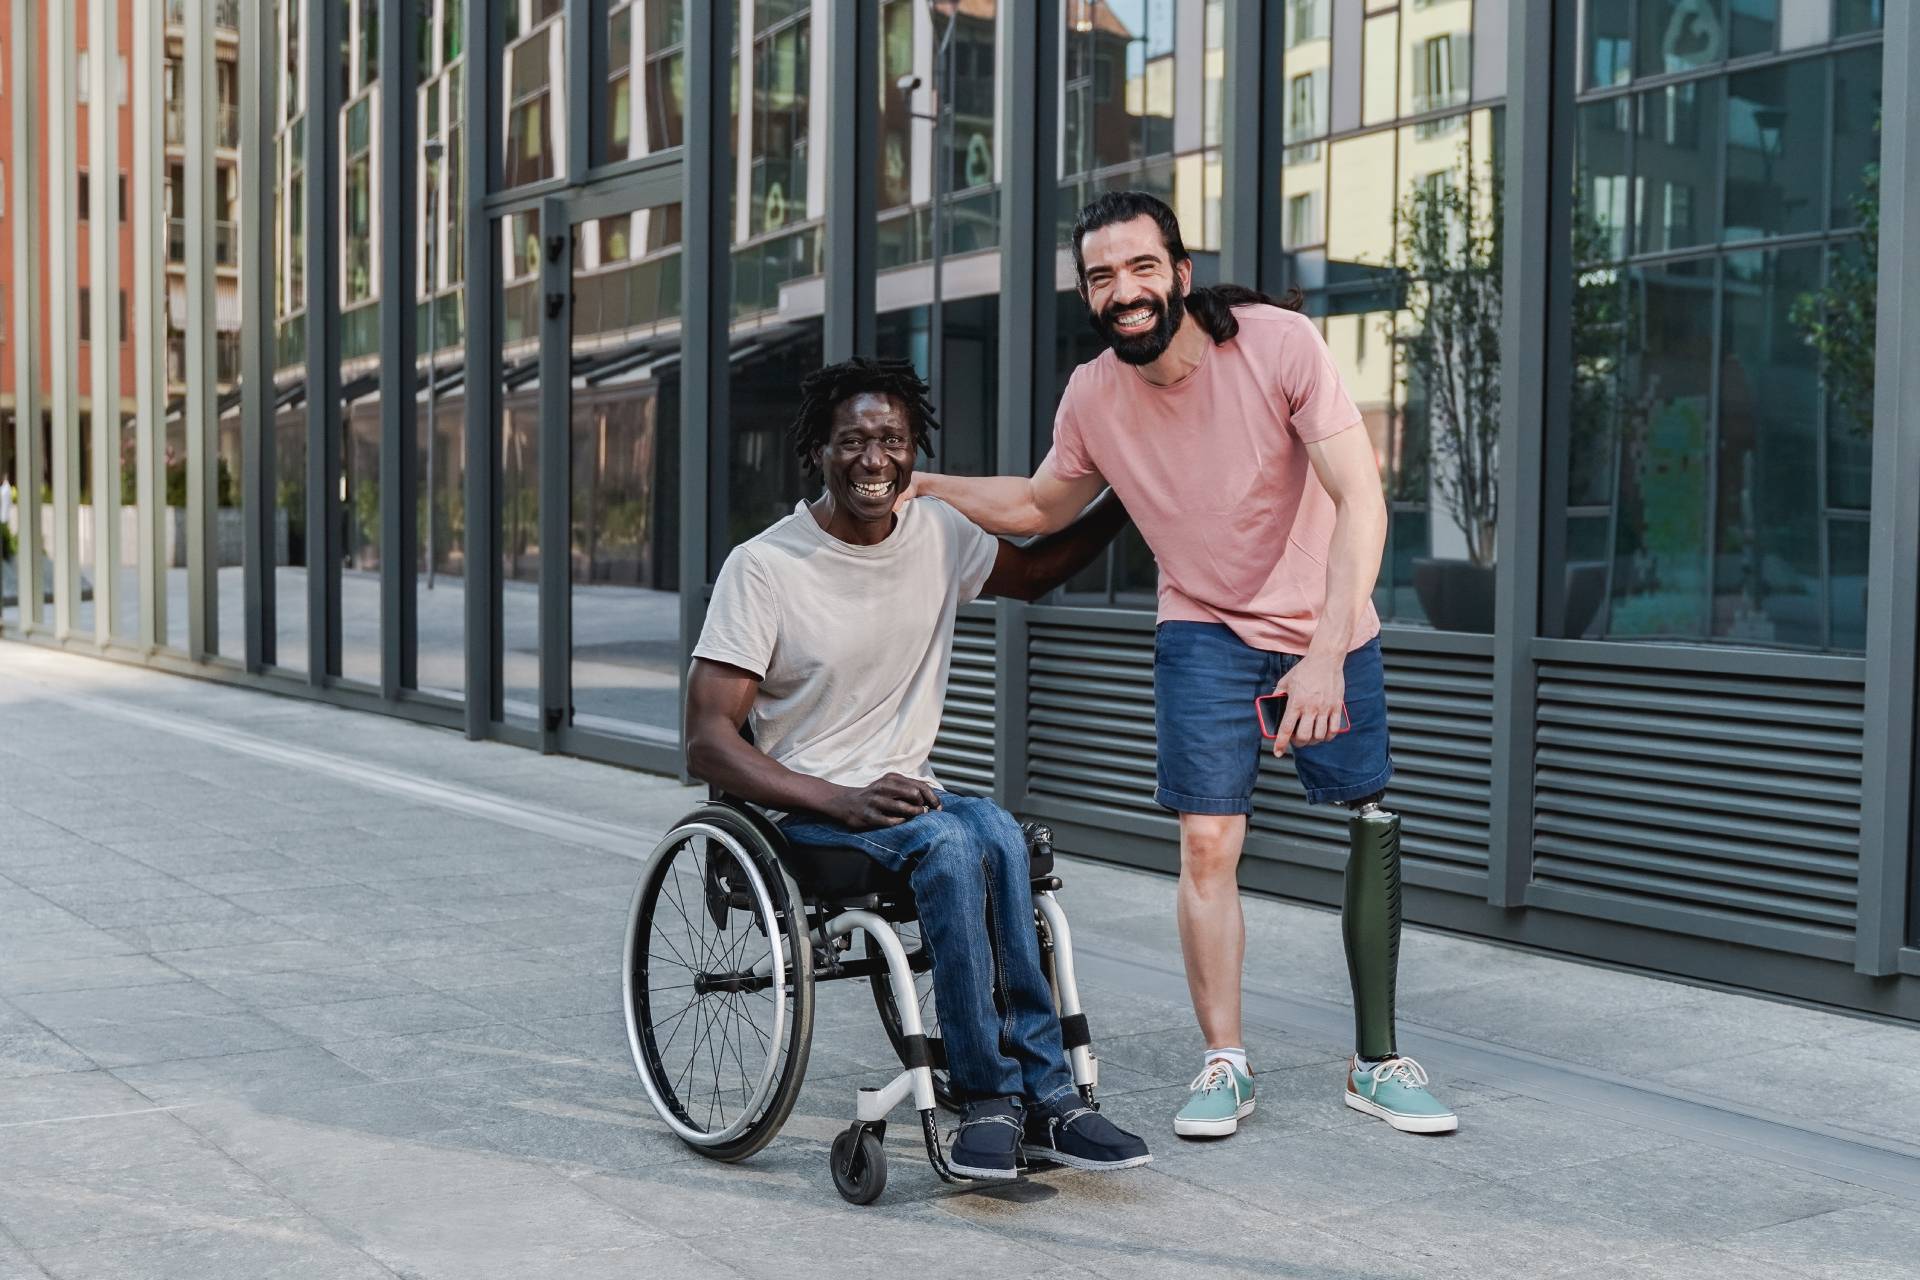 A person using a prosthetic leg and a person in a wheelchair on a city sidewalk.